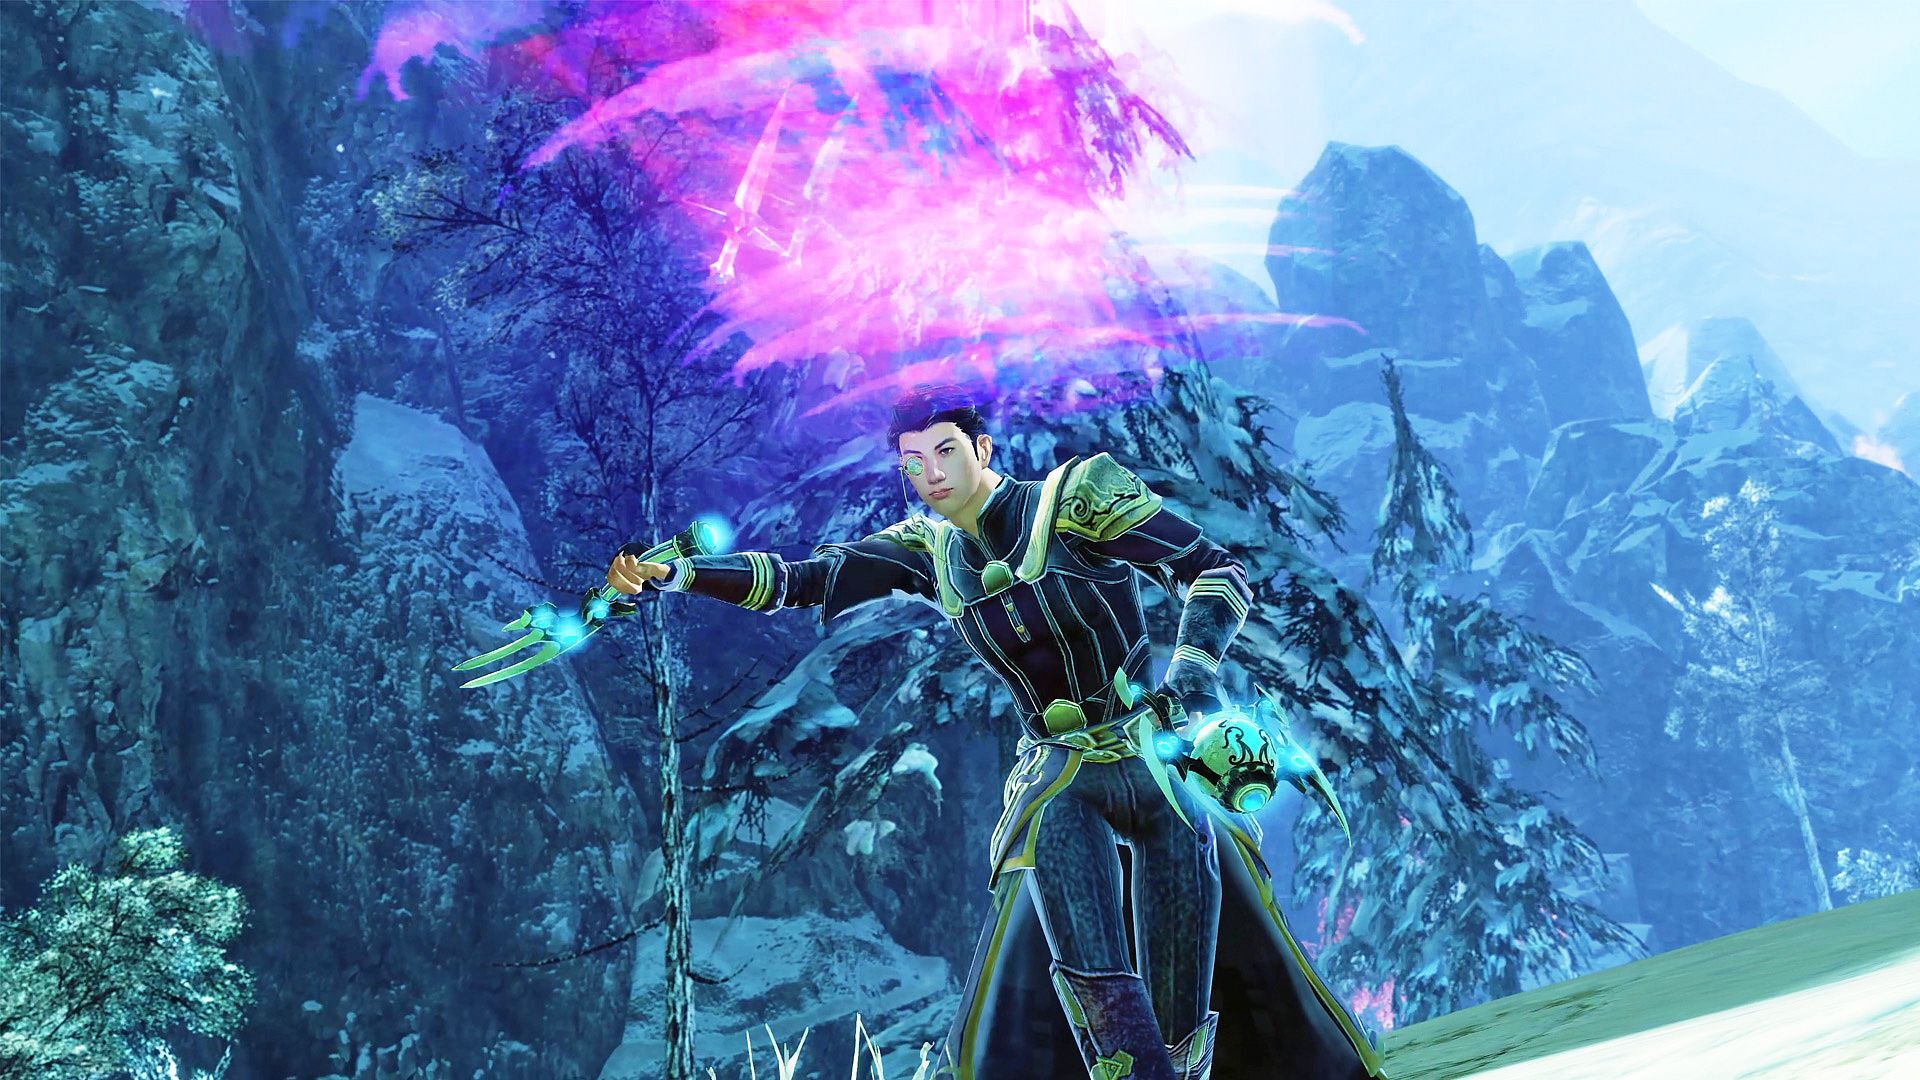 Guild Wars 2: End of Dragons review